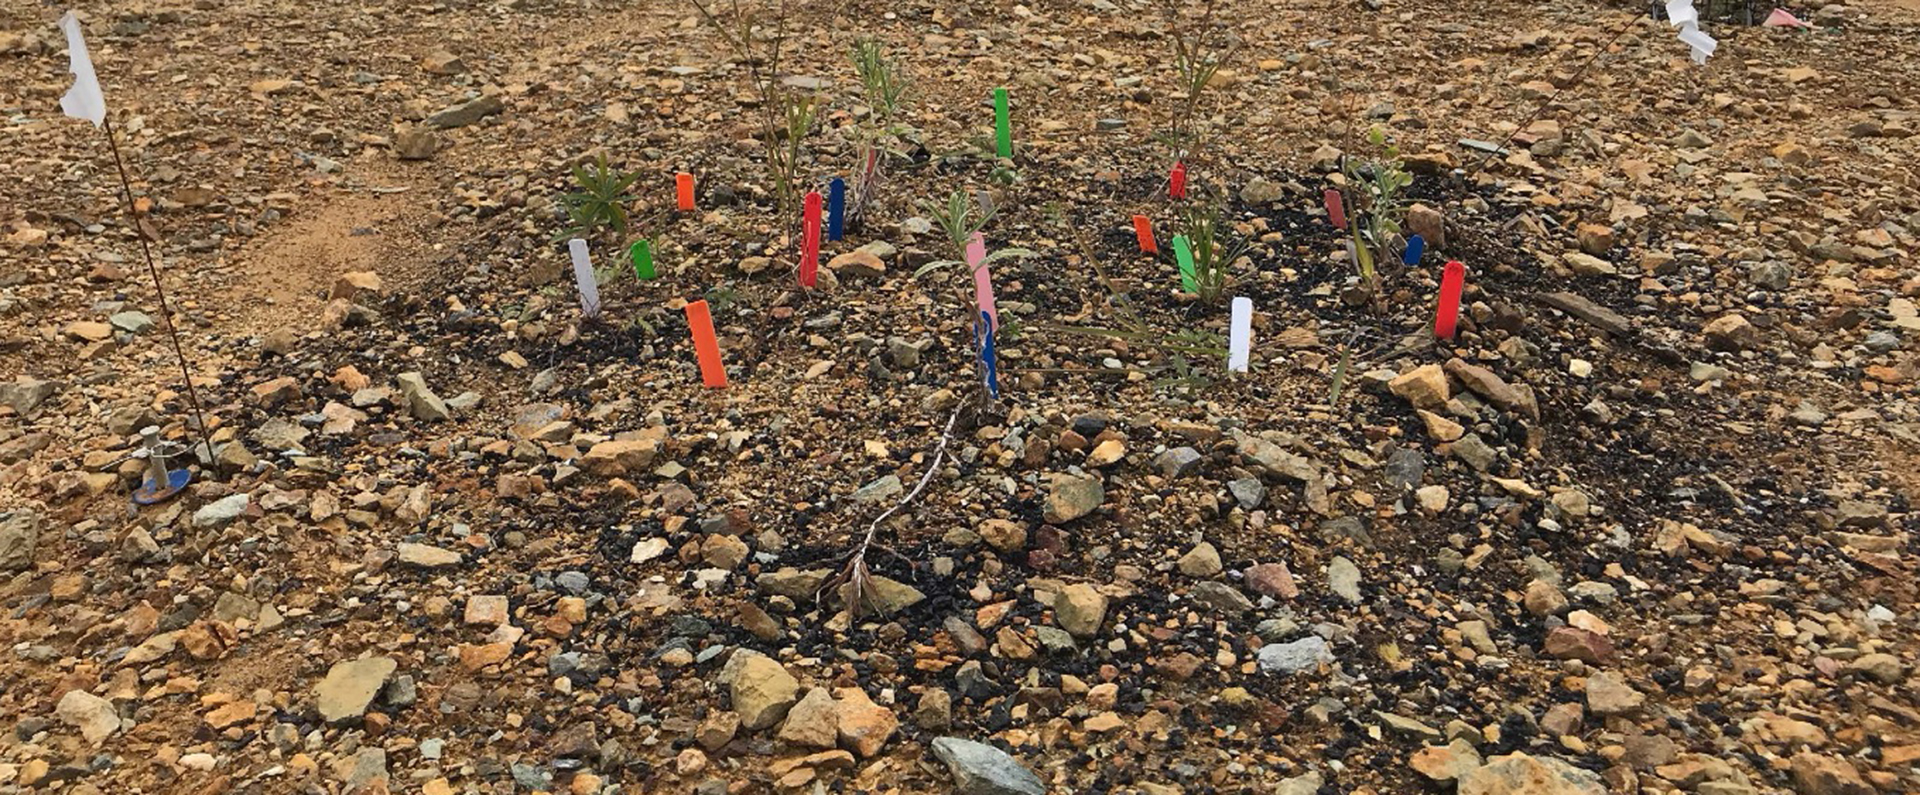 Experimental plots a few weeks after herbaceous plants were transplanted into biochar-amended plots.